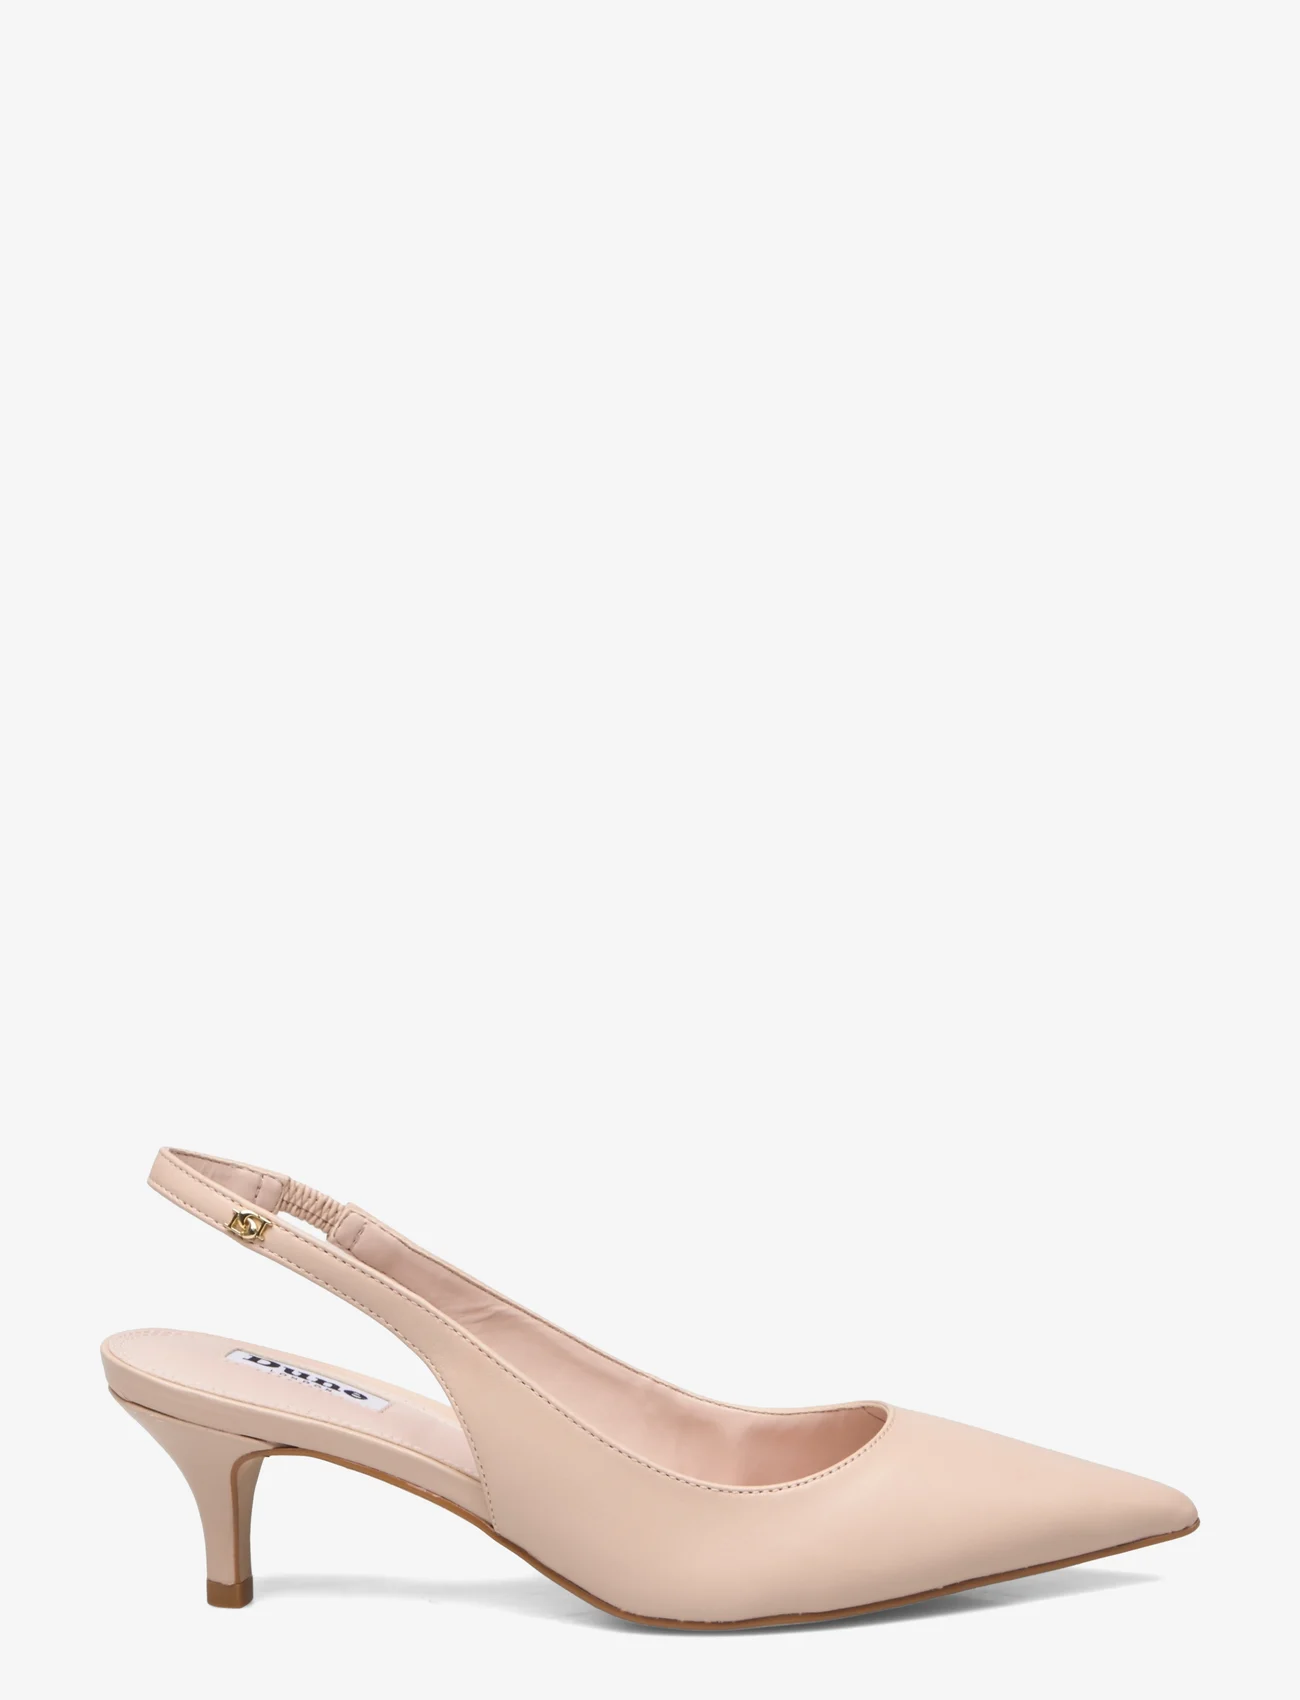 Dune London - capitol - party wear at outlet prices - nude - 1